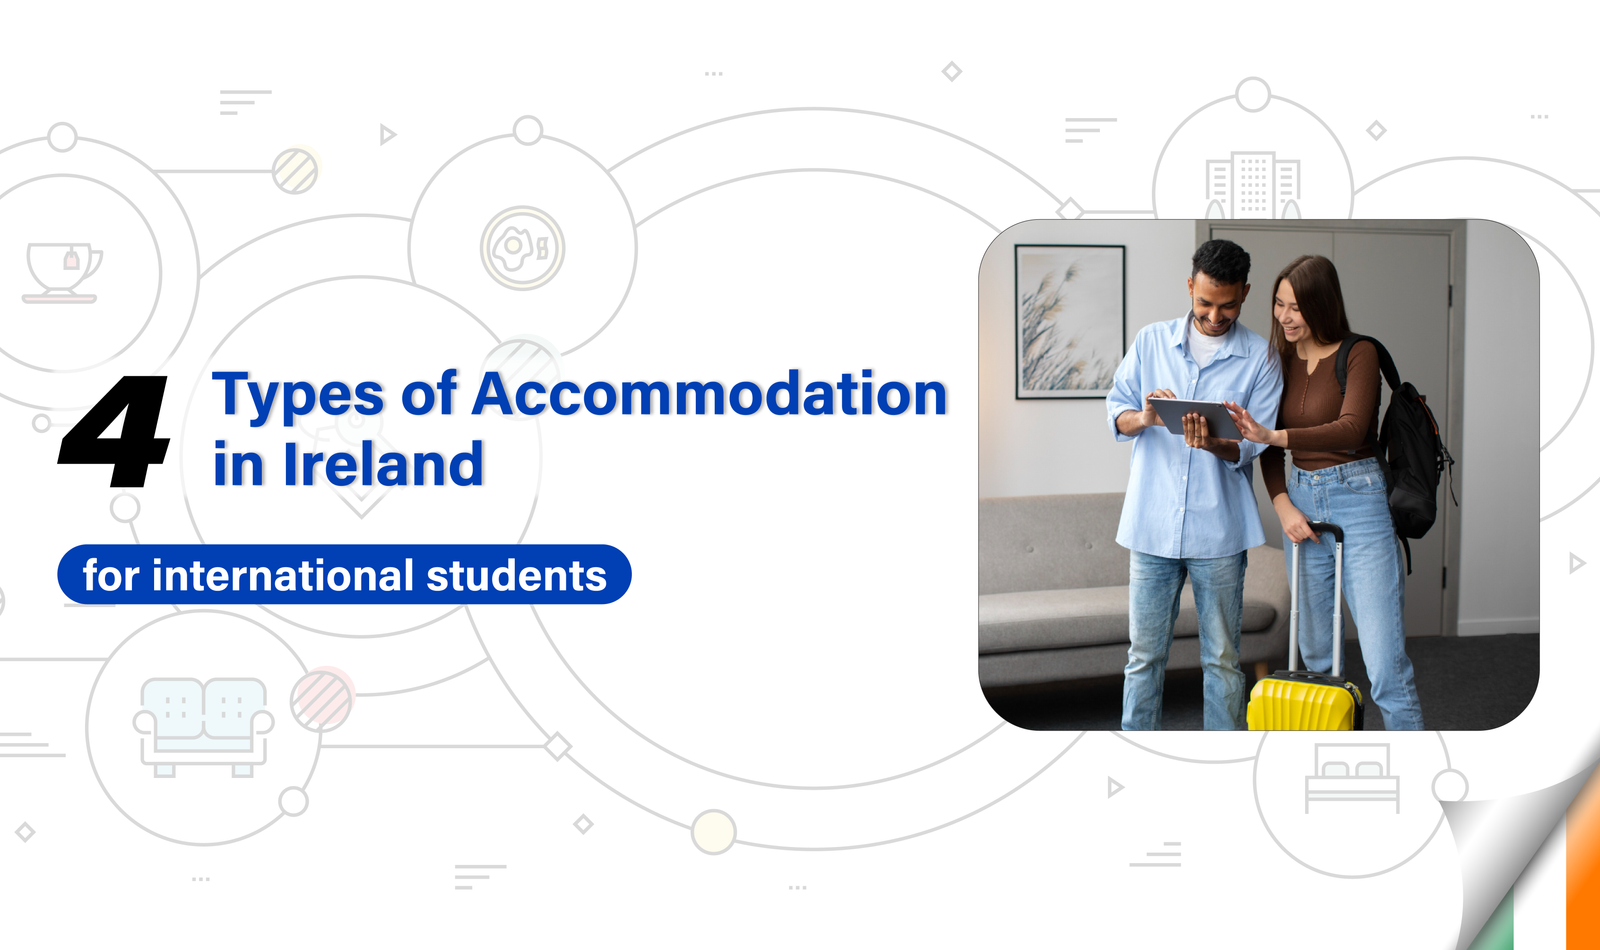 Four Types of Accommodation in Ireland for International Students